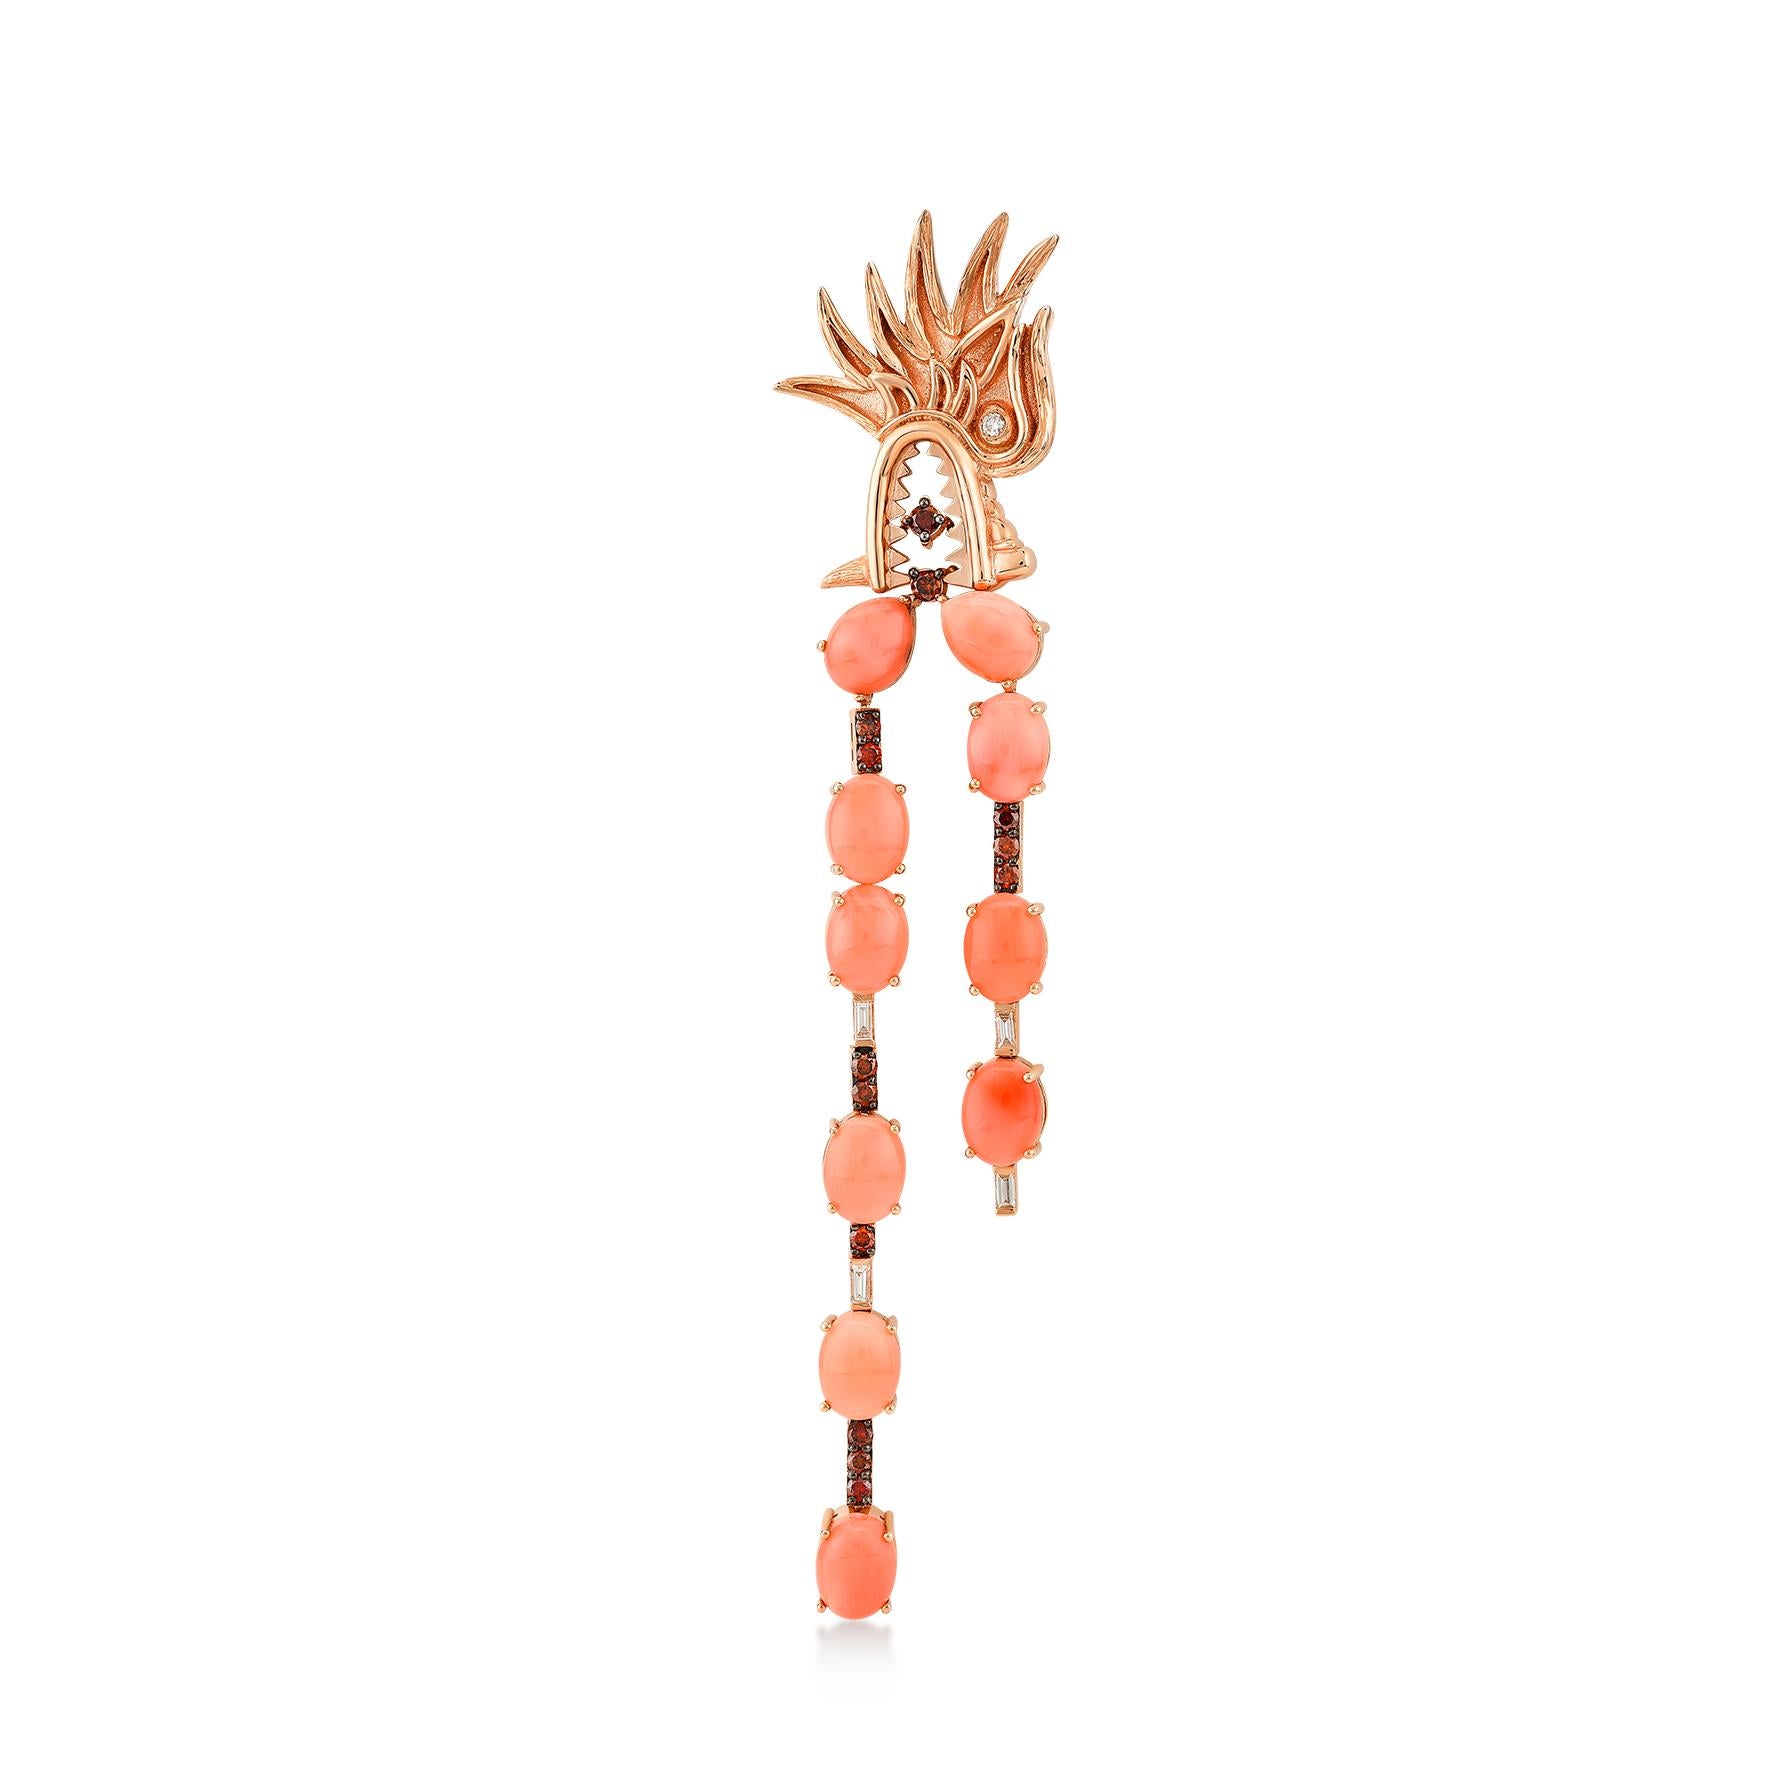 Dragon lady coral 14k rose gold long earring (single) by Selda Jewellery

Additional Information:-
Collection: Dragon Lady Collection
14k Rose gold
0.05ct Baguette diamond
0.12ct Baguette diamond
0.02ct White diamond
0.31ct Red diamond
0.08ct Red